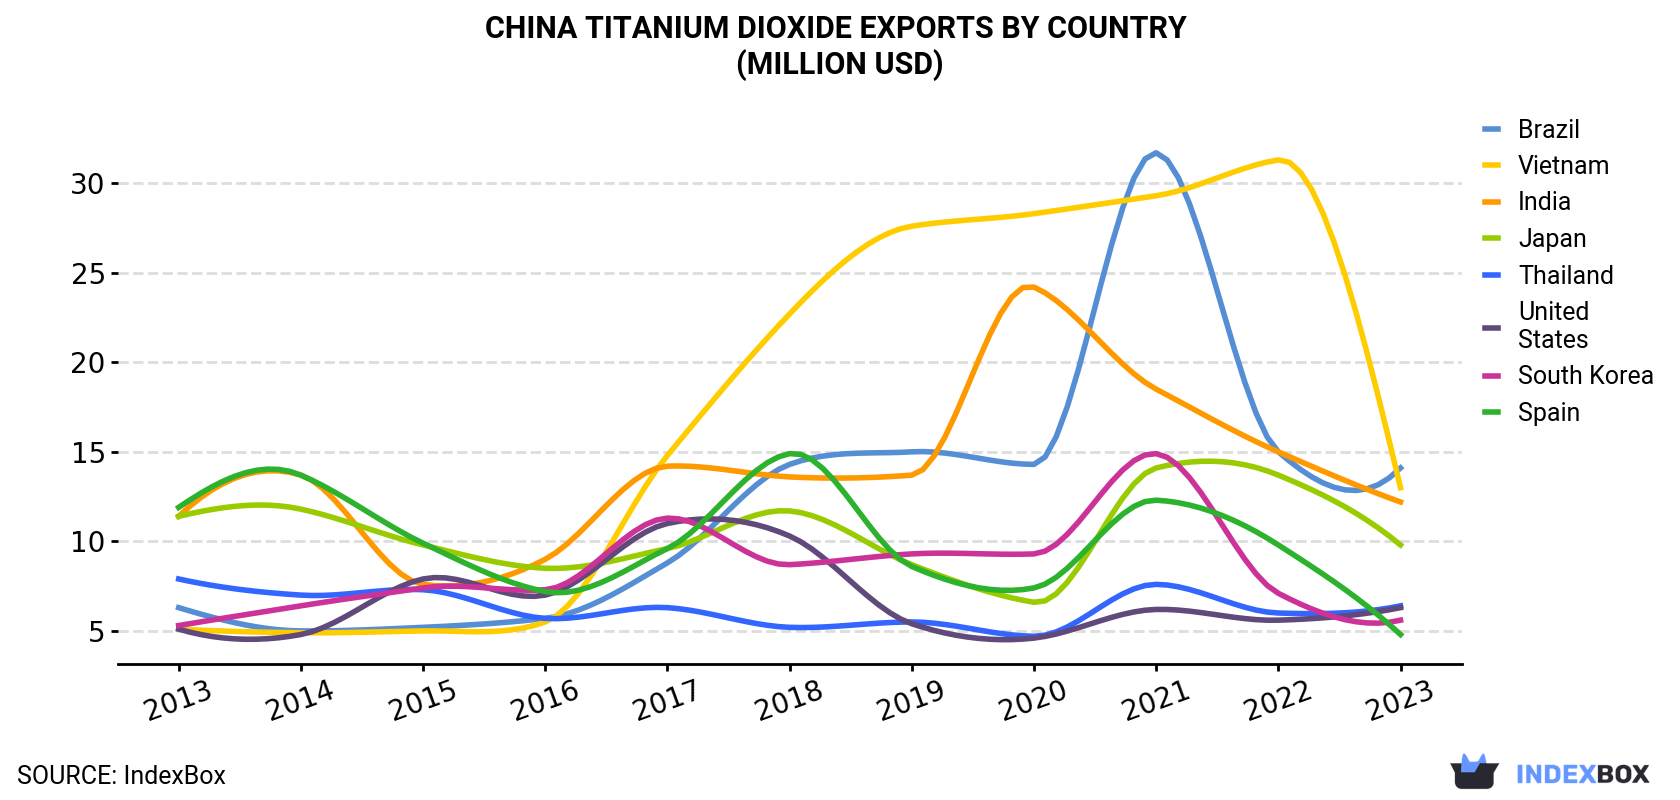 China Titanium Dioxide Exports By Country (Million USD)